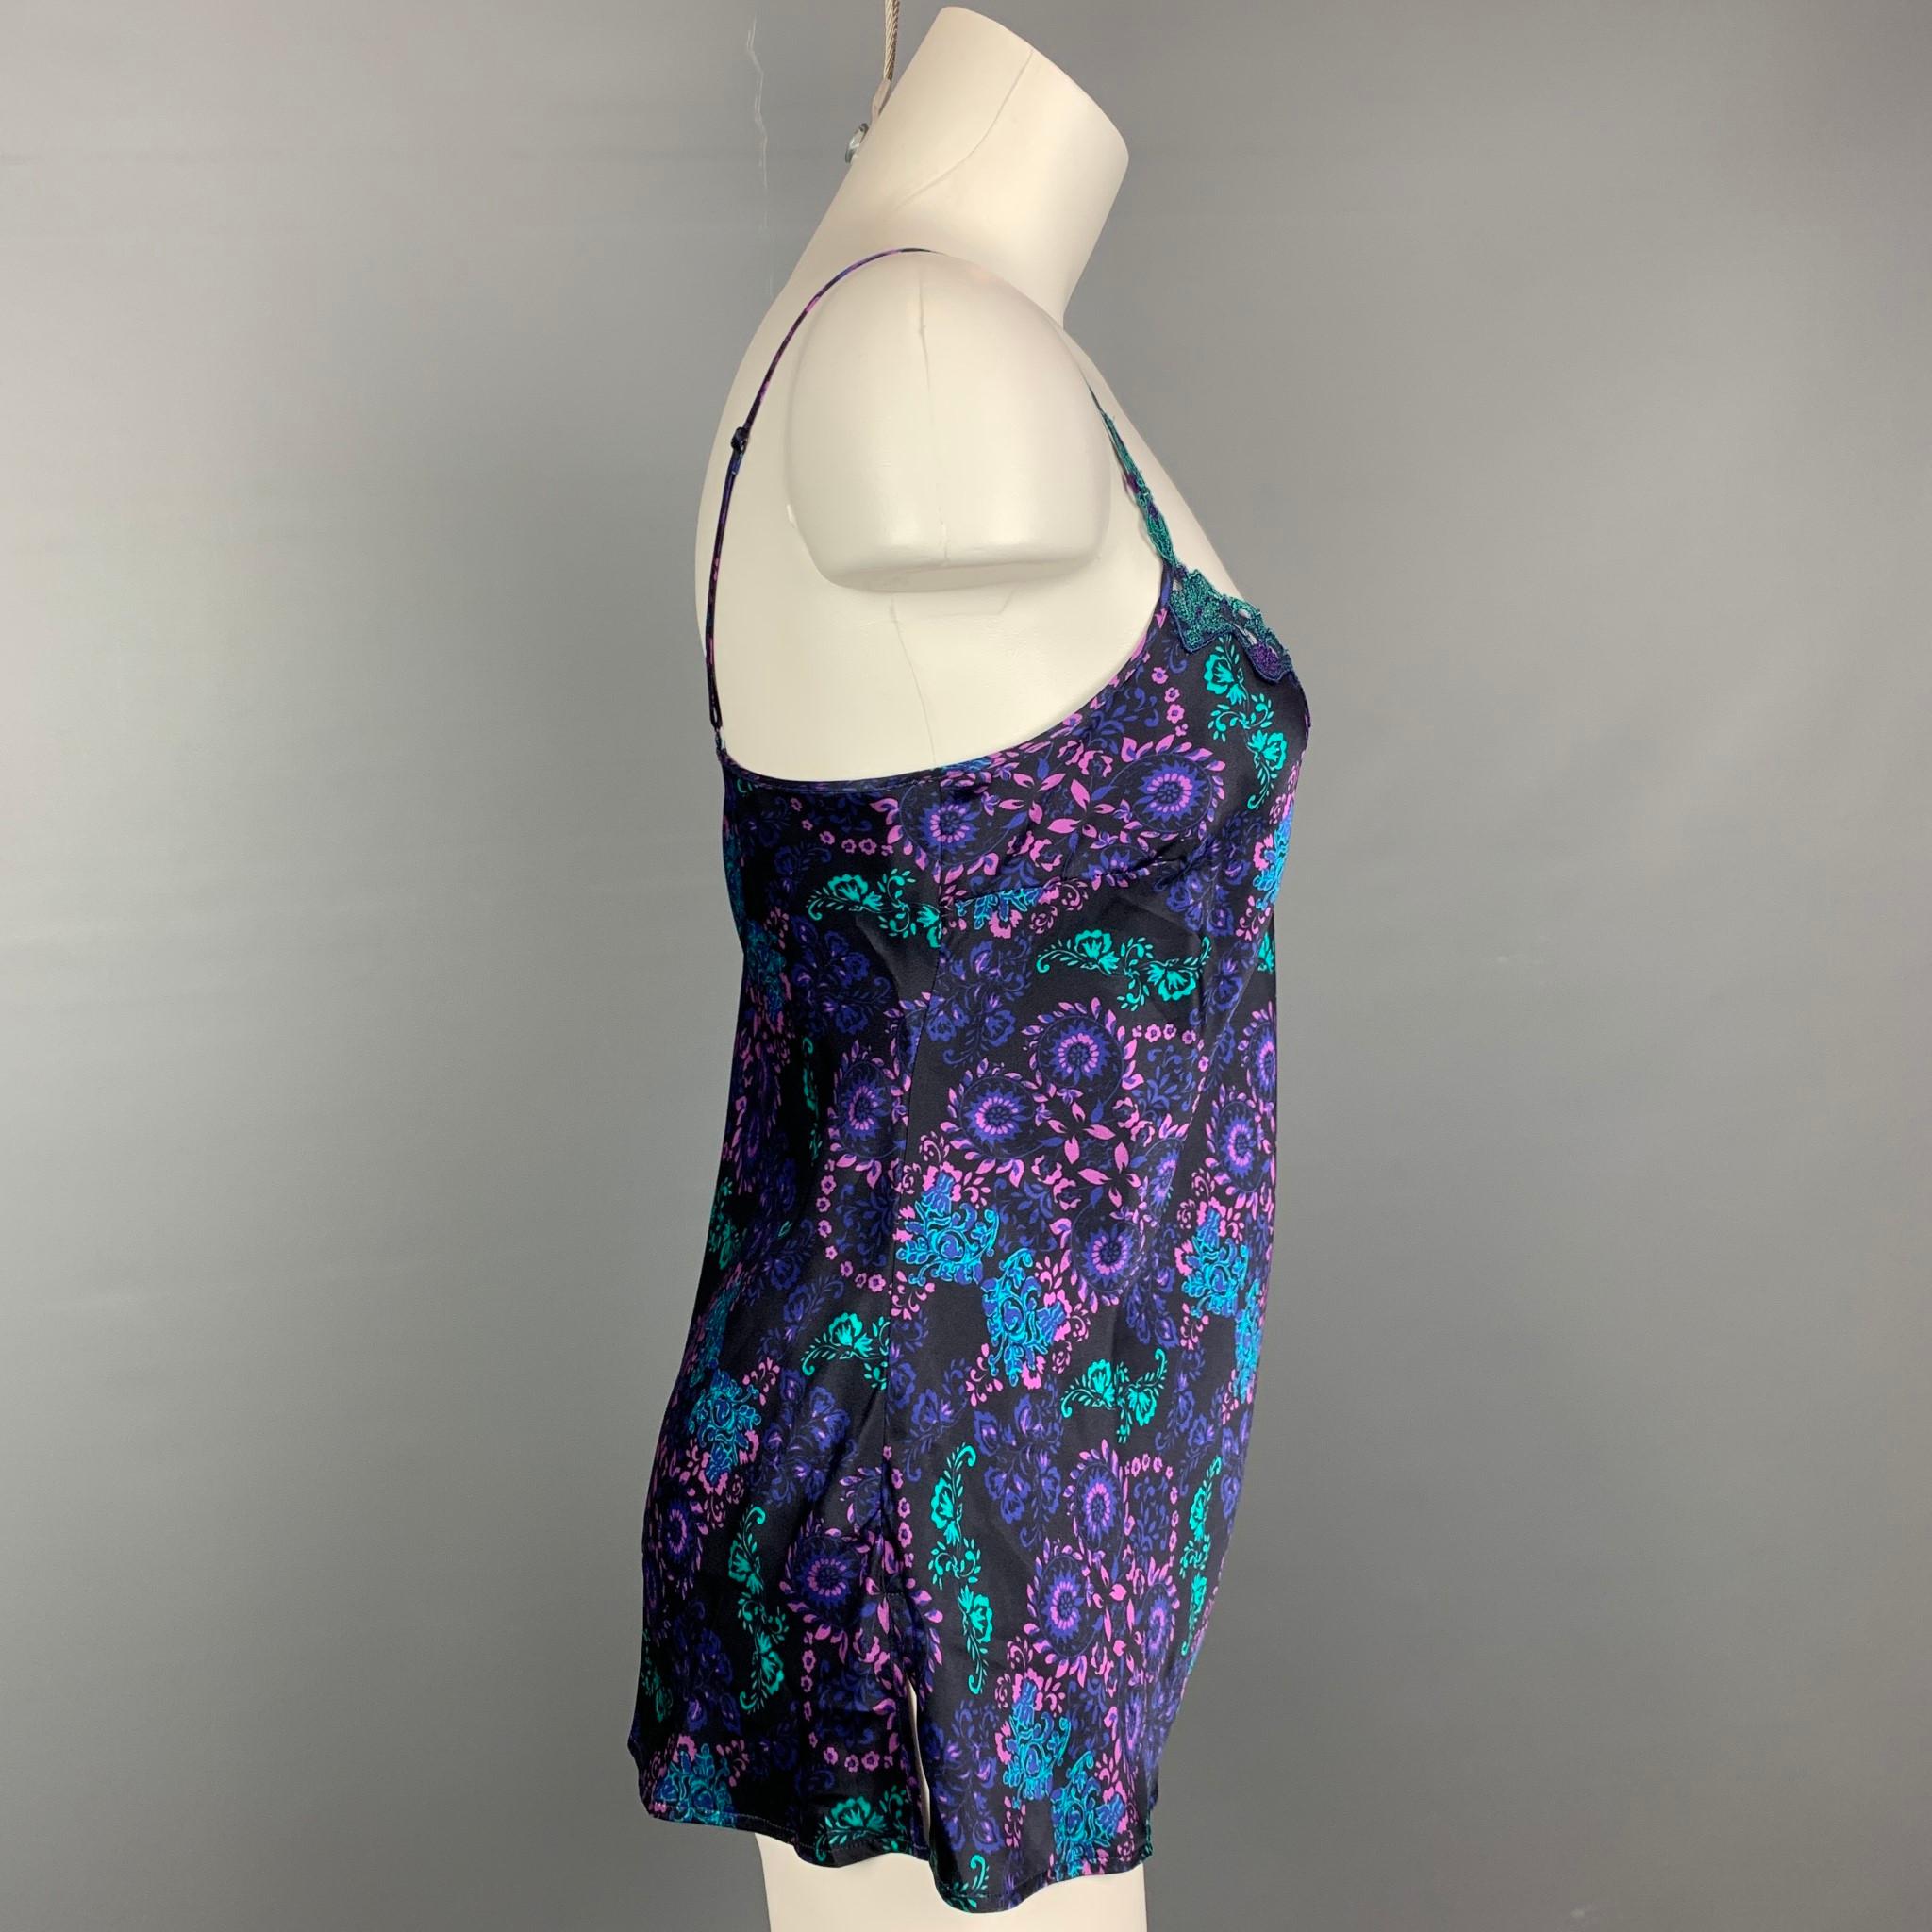 LISE CHARMEL casual top comes in a black & purple print silk / polyester with a lace trim featuring spaghetti straps. Made in Bulgaria.

Very Good Pre-Owned Condition.
Marked: FR 42 / IT 3 / EU 40 / US M / UK M

Measurements:

Bust: 34 in.
Length: